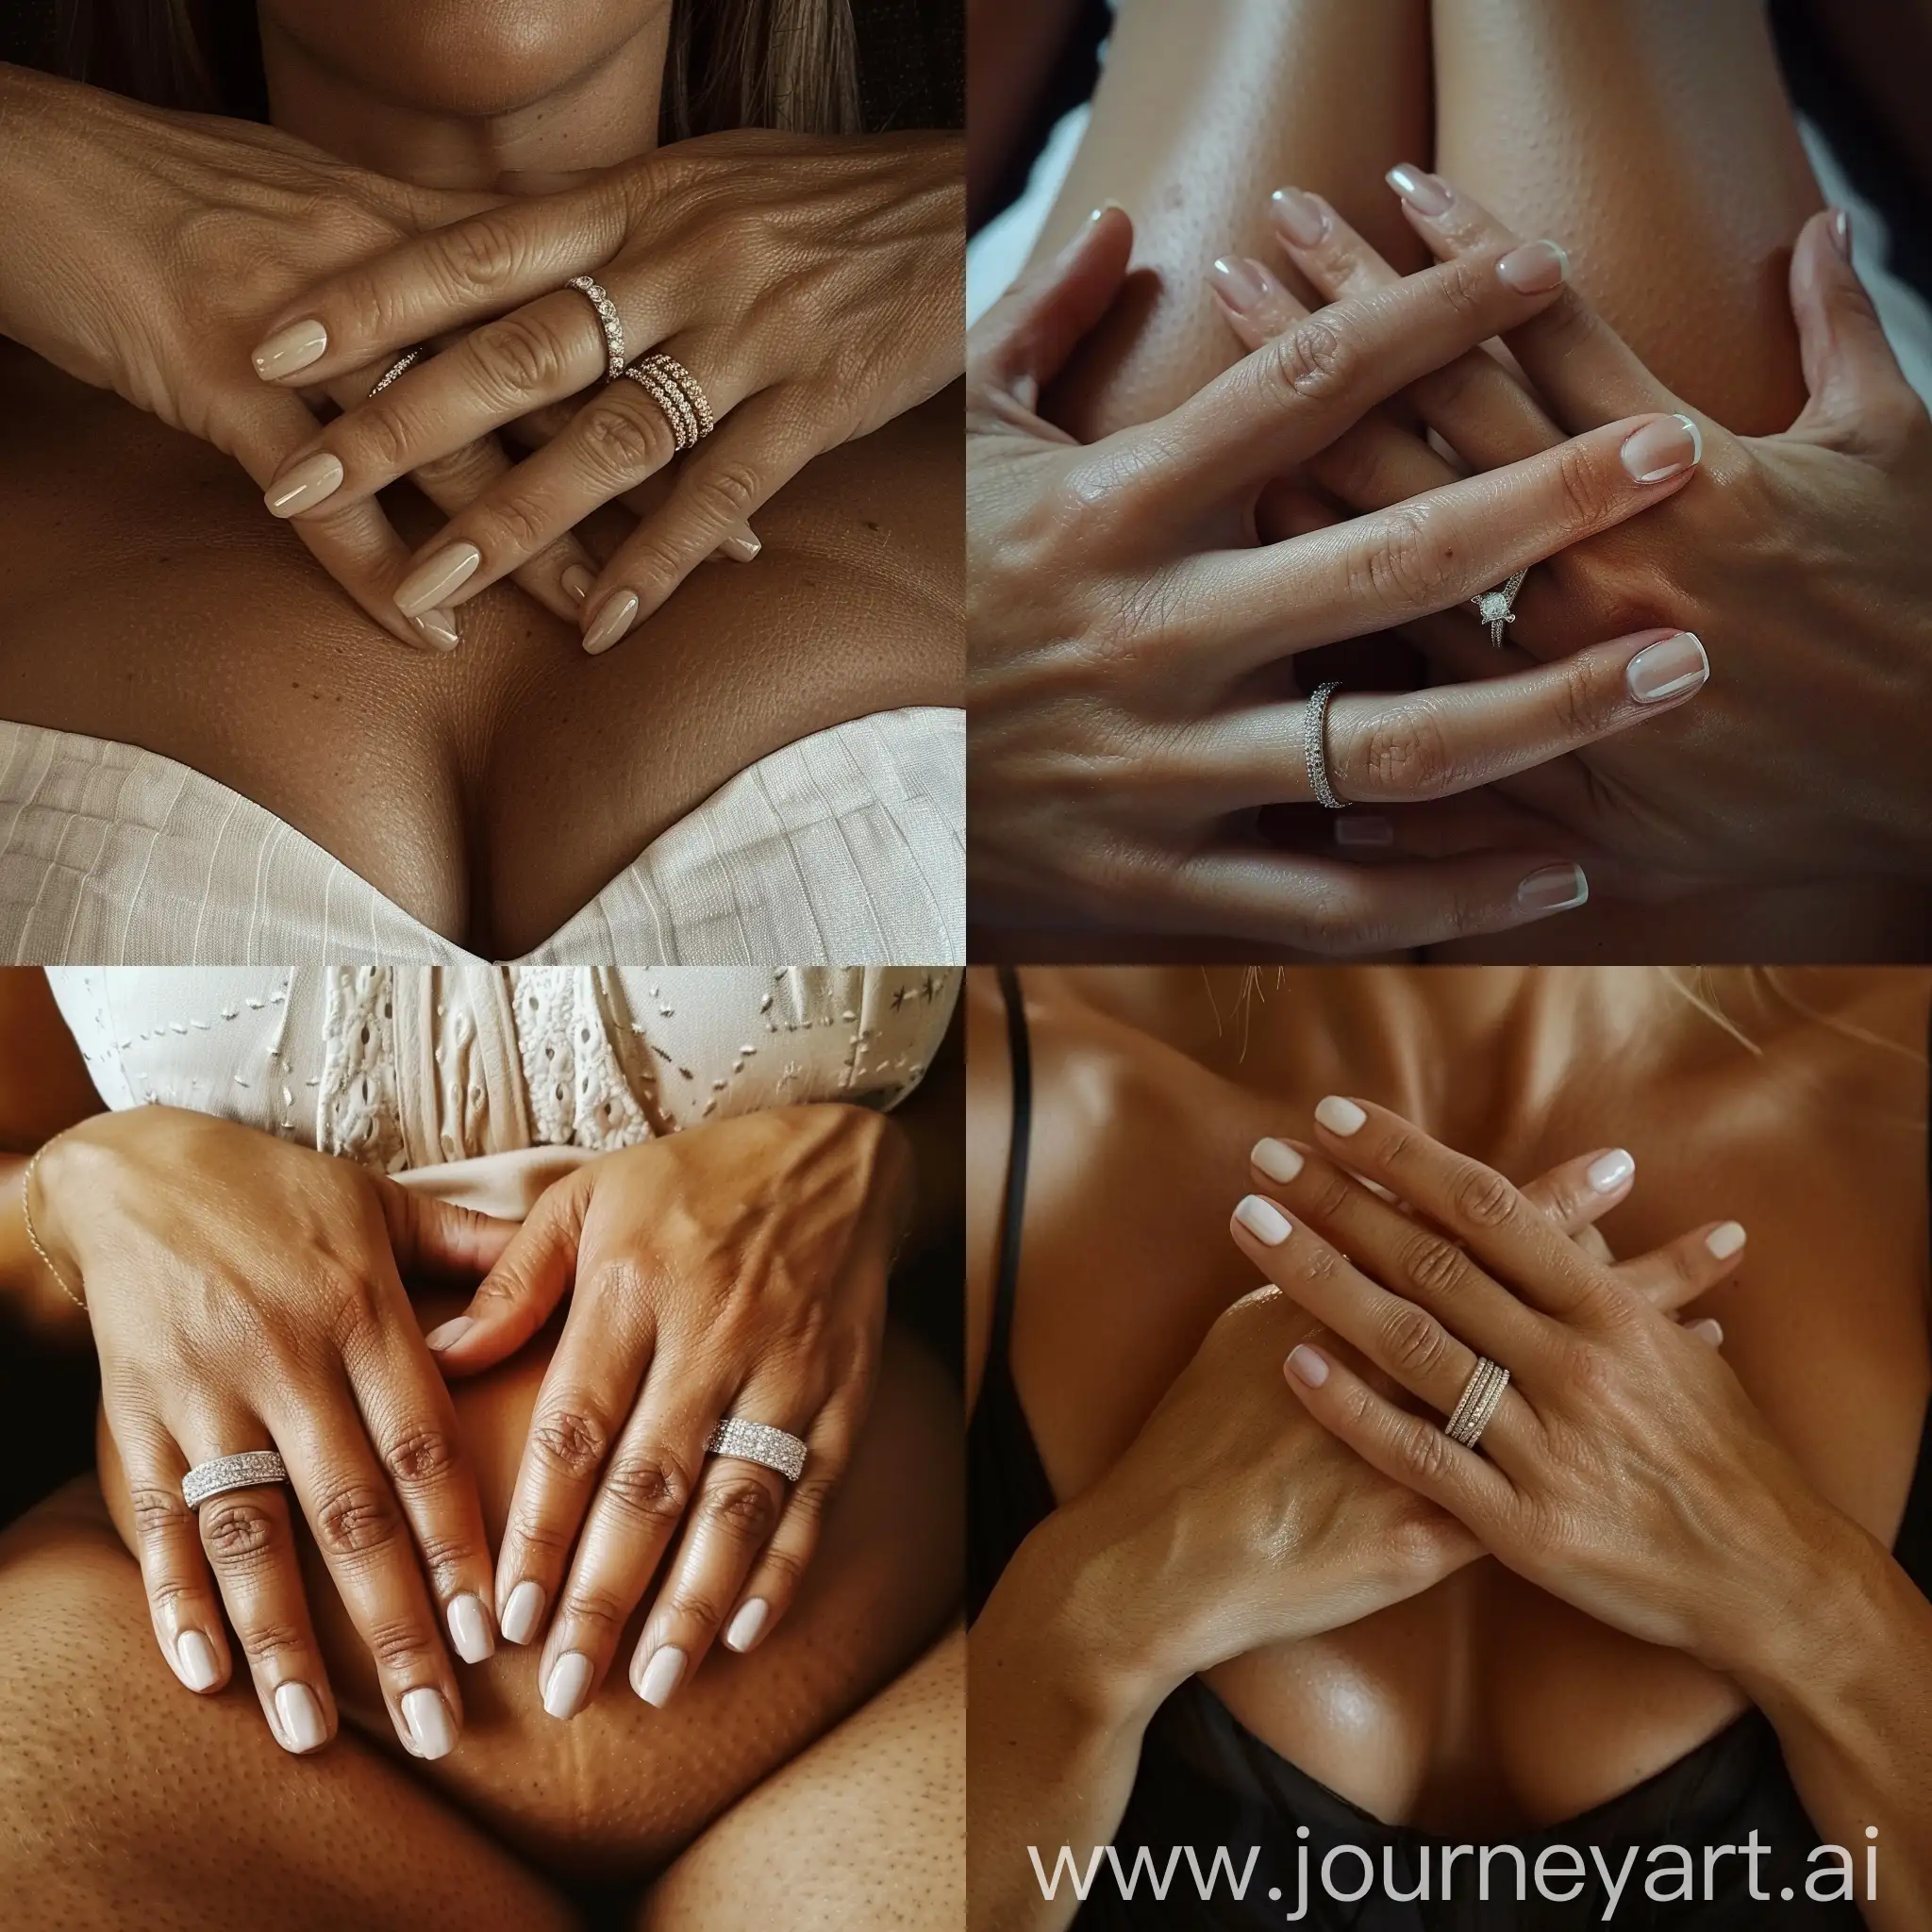 CloseUp-Shot-of-Womans-Hands-with-Wedding-Ring-and-Perfect-Nails